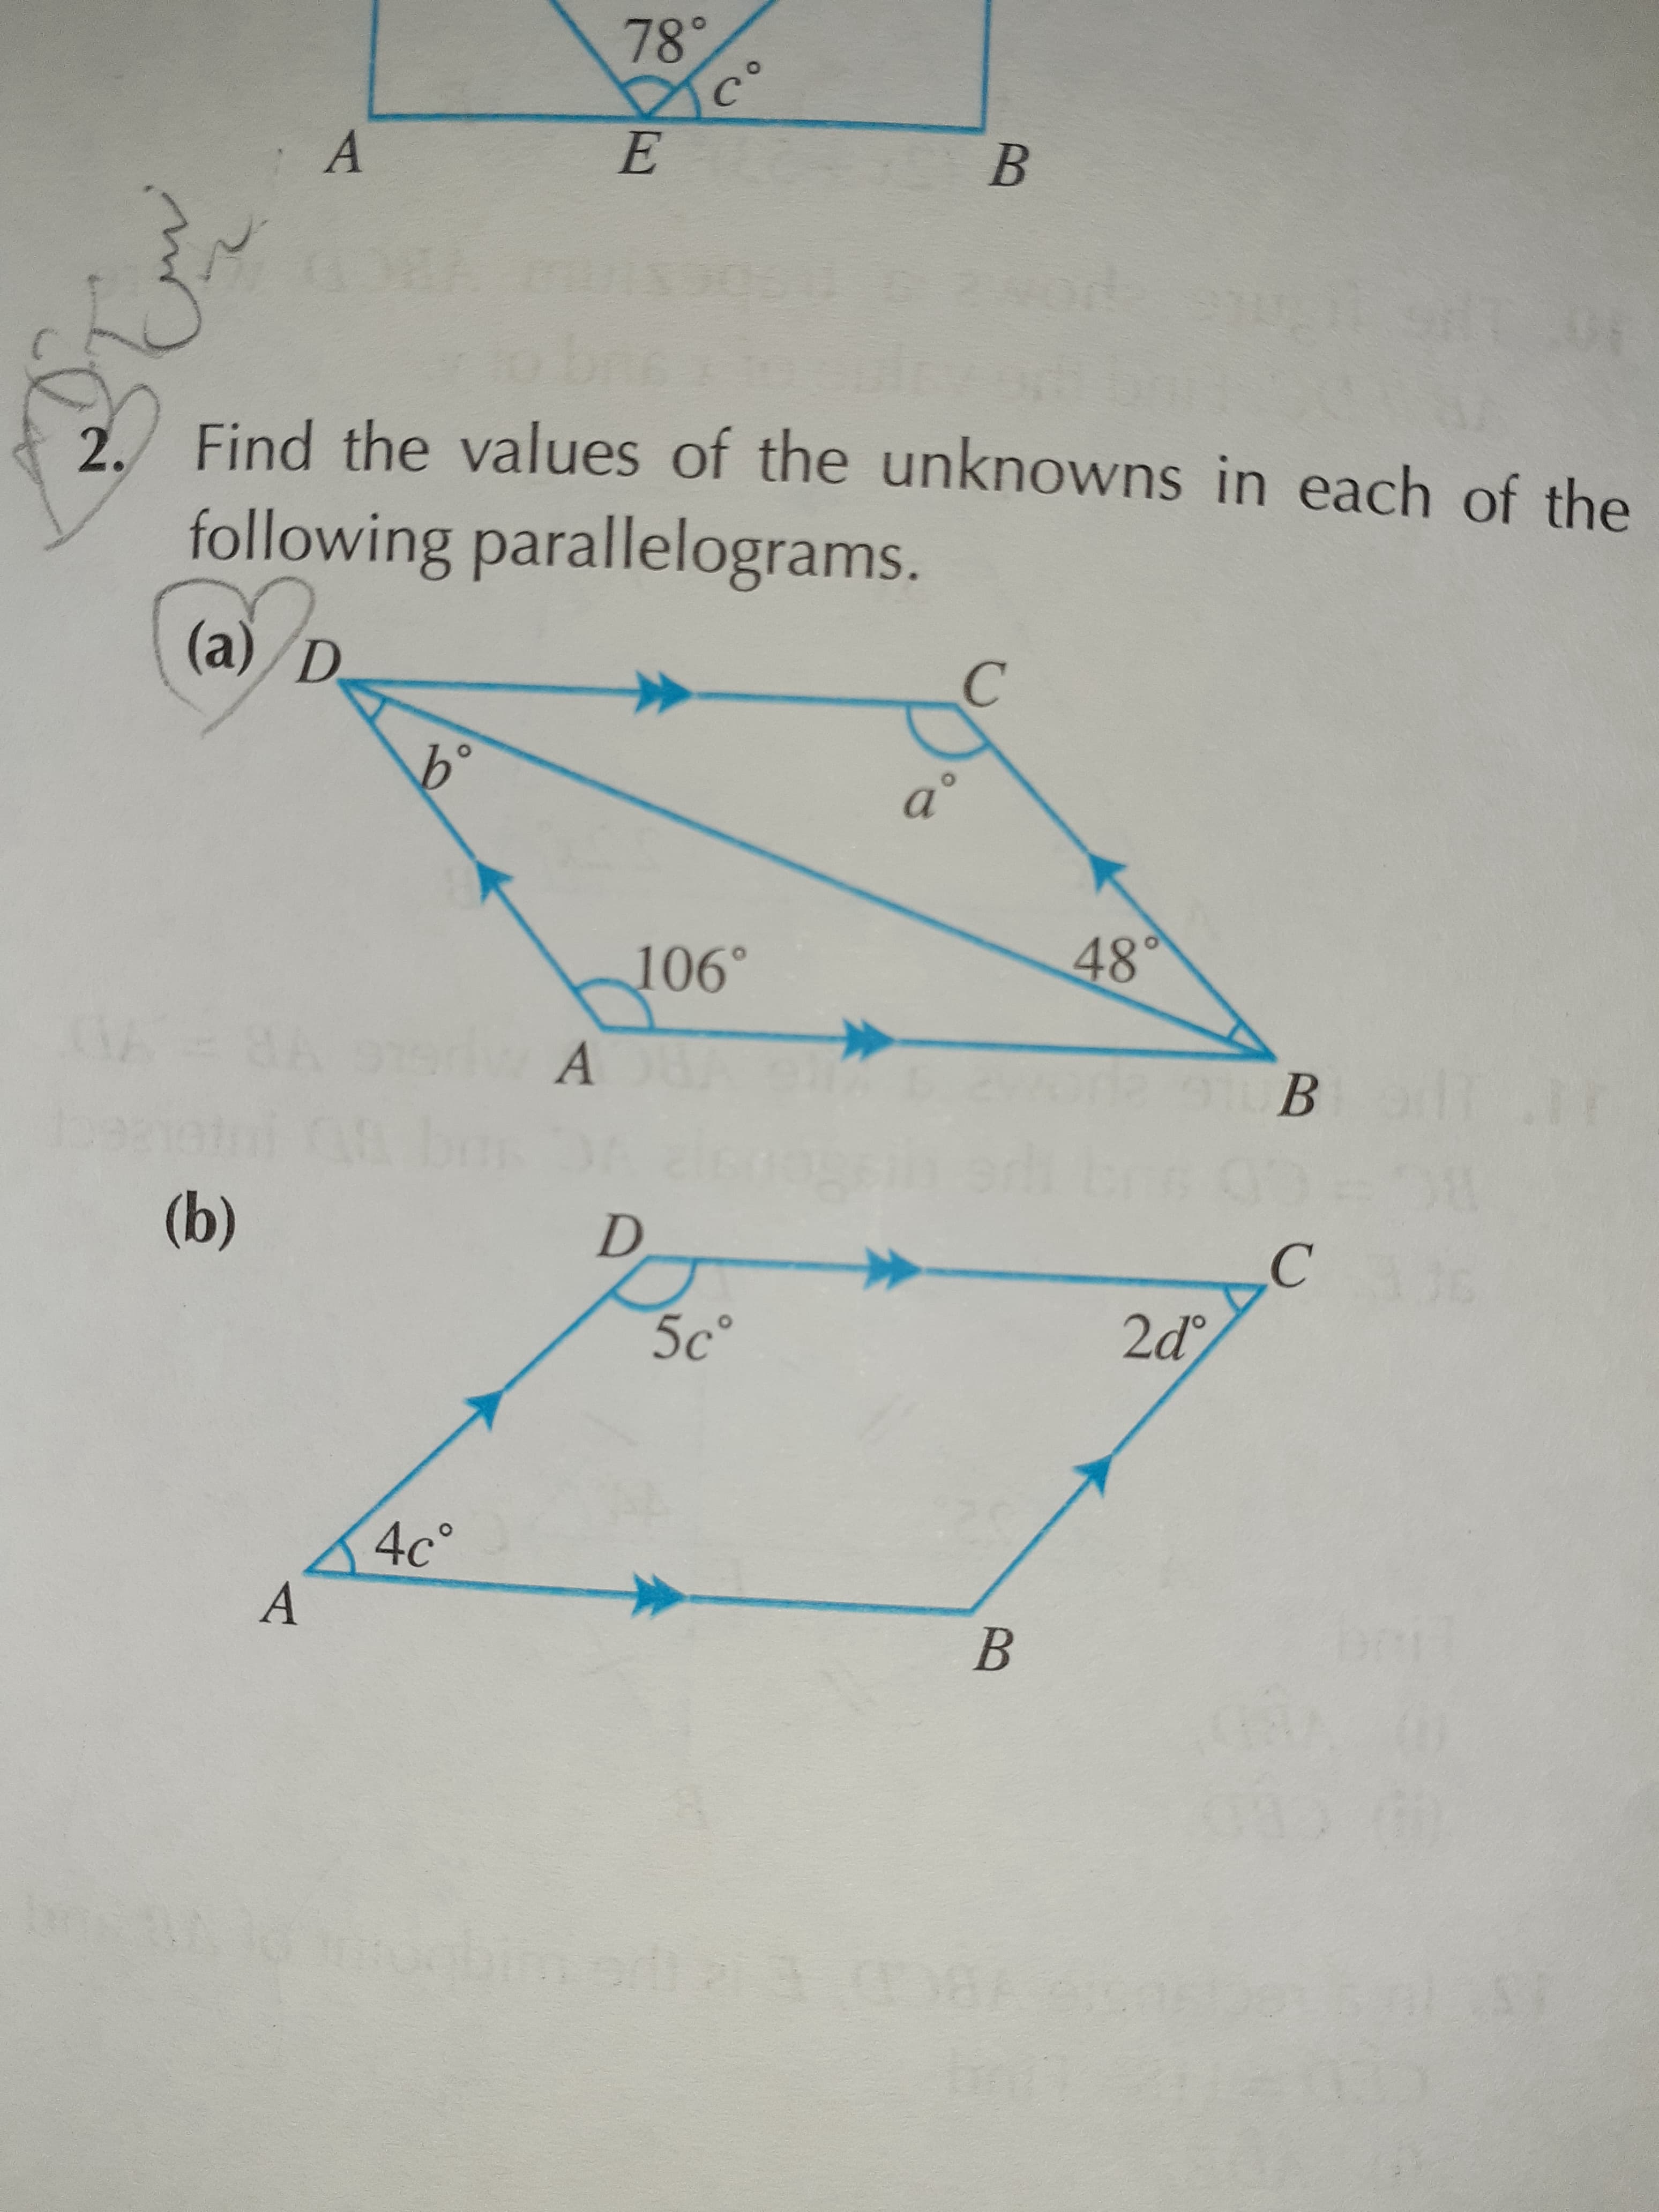 2 Find the values of the unknowns in each of the
following parallelograms.
(a)/D
b°
a°
106°
48'
riw A
